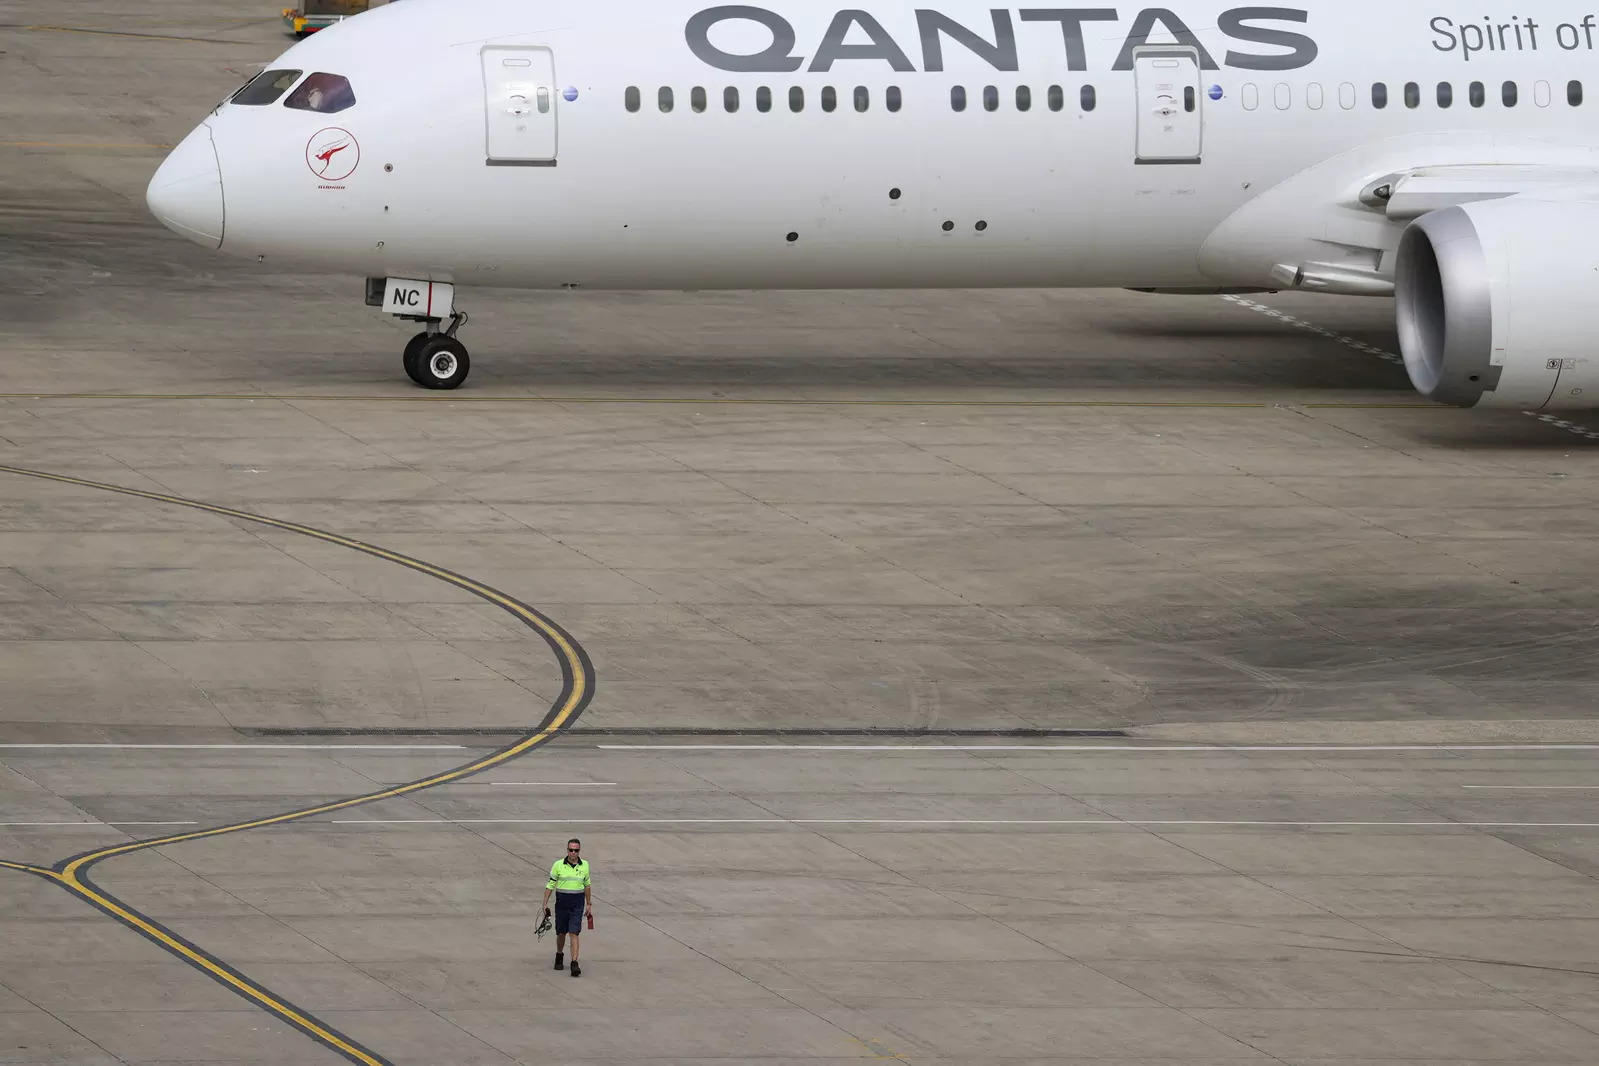 Qantas engineers vote on work stoppages as they seek higher pay